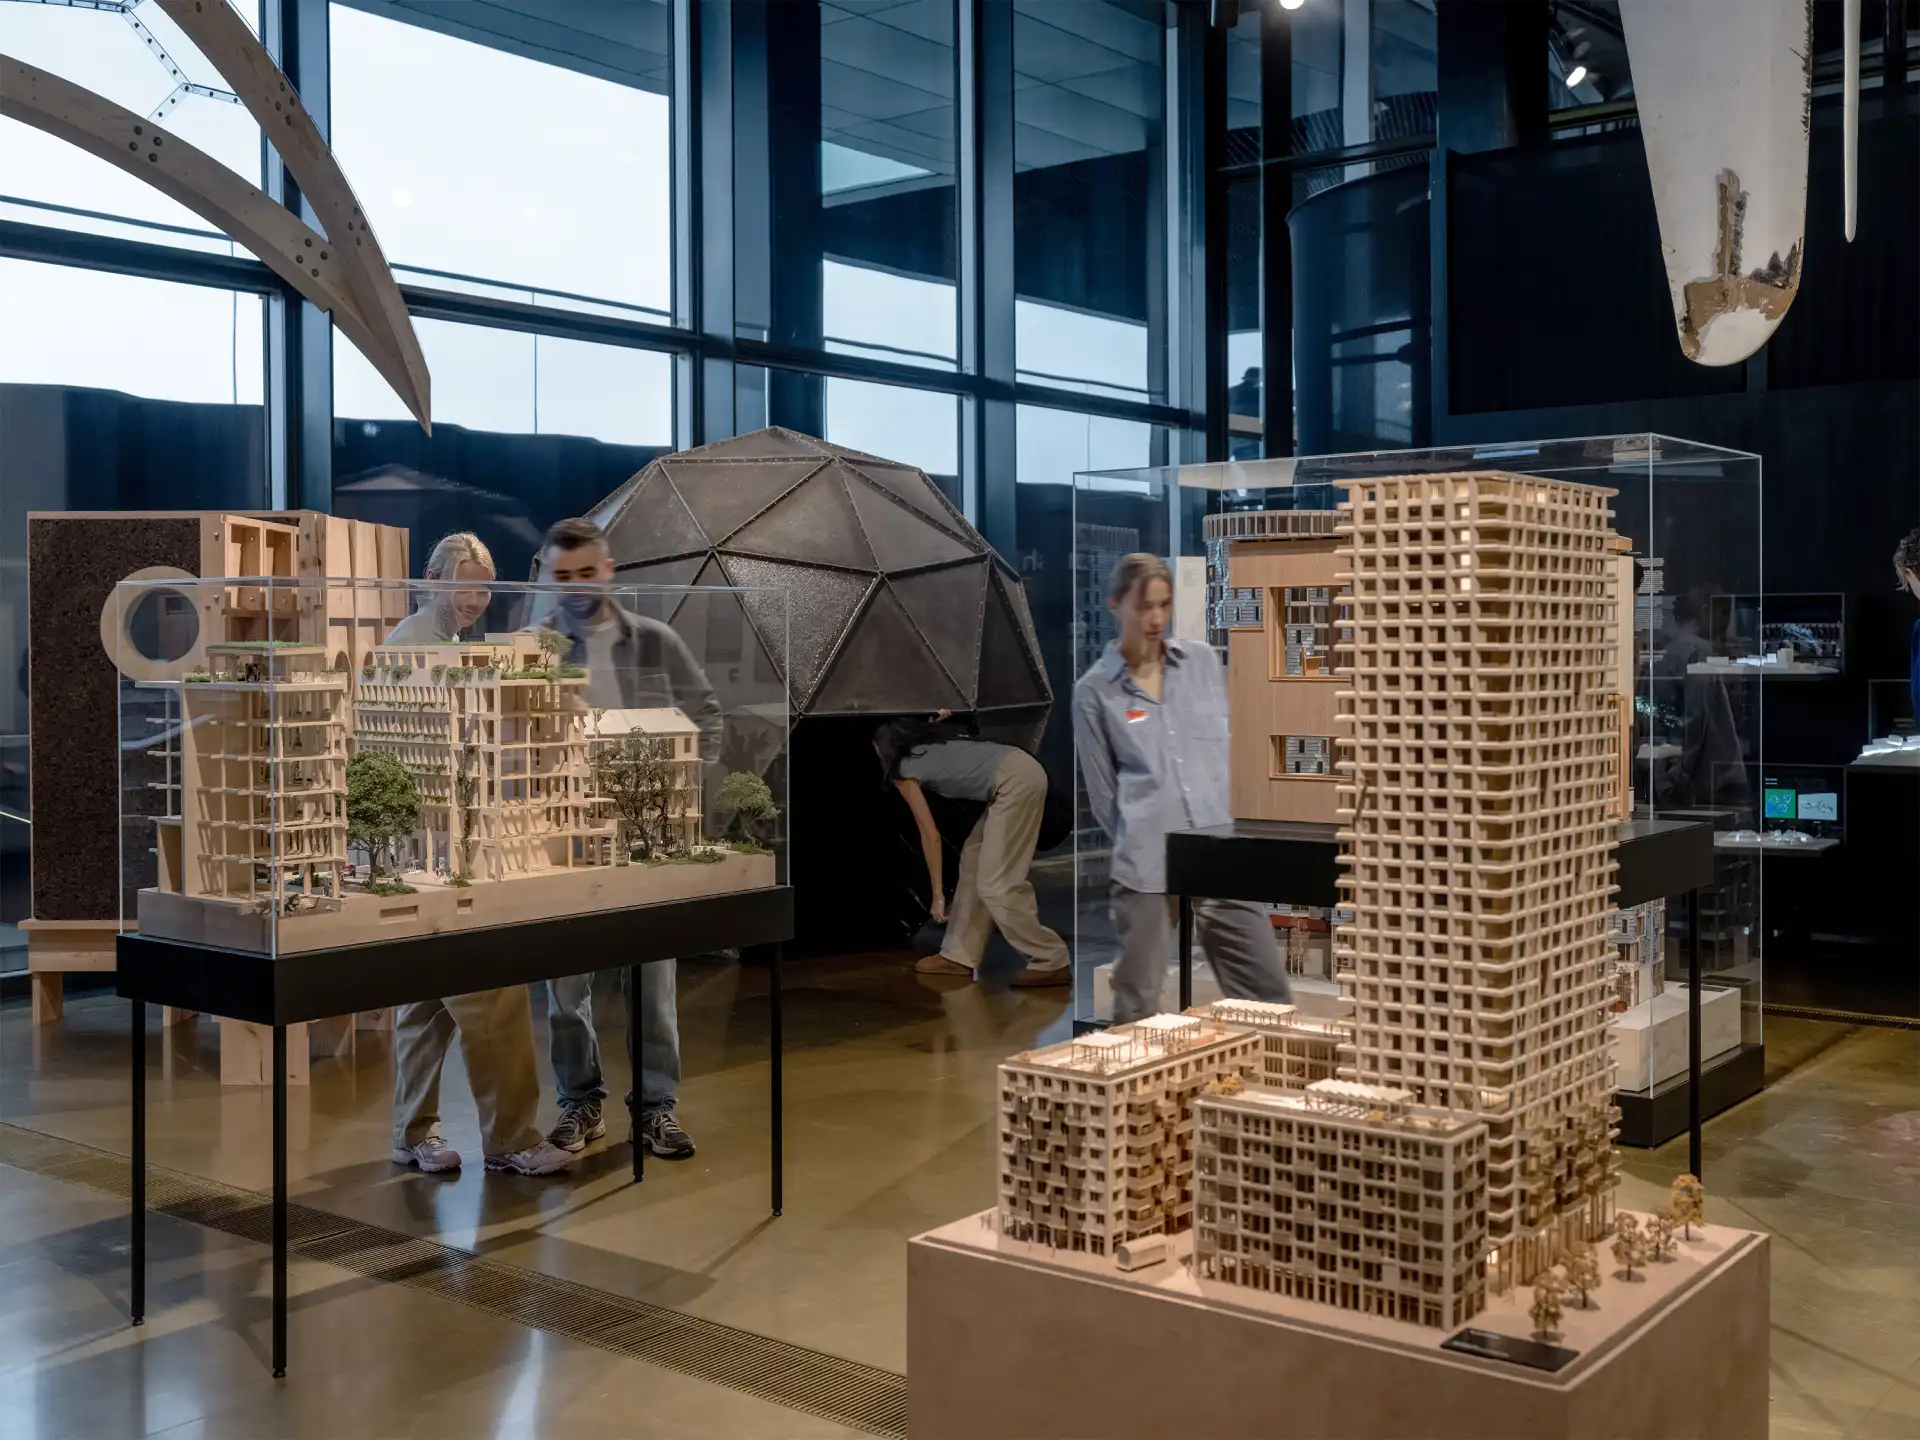 The overview effect dome adorning the 'So Danish' exhibition at Danish Architecture Center with more traditional building exhibits in front.